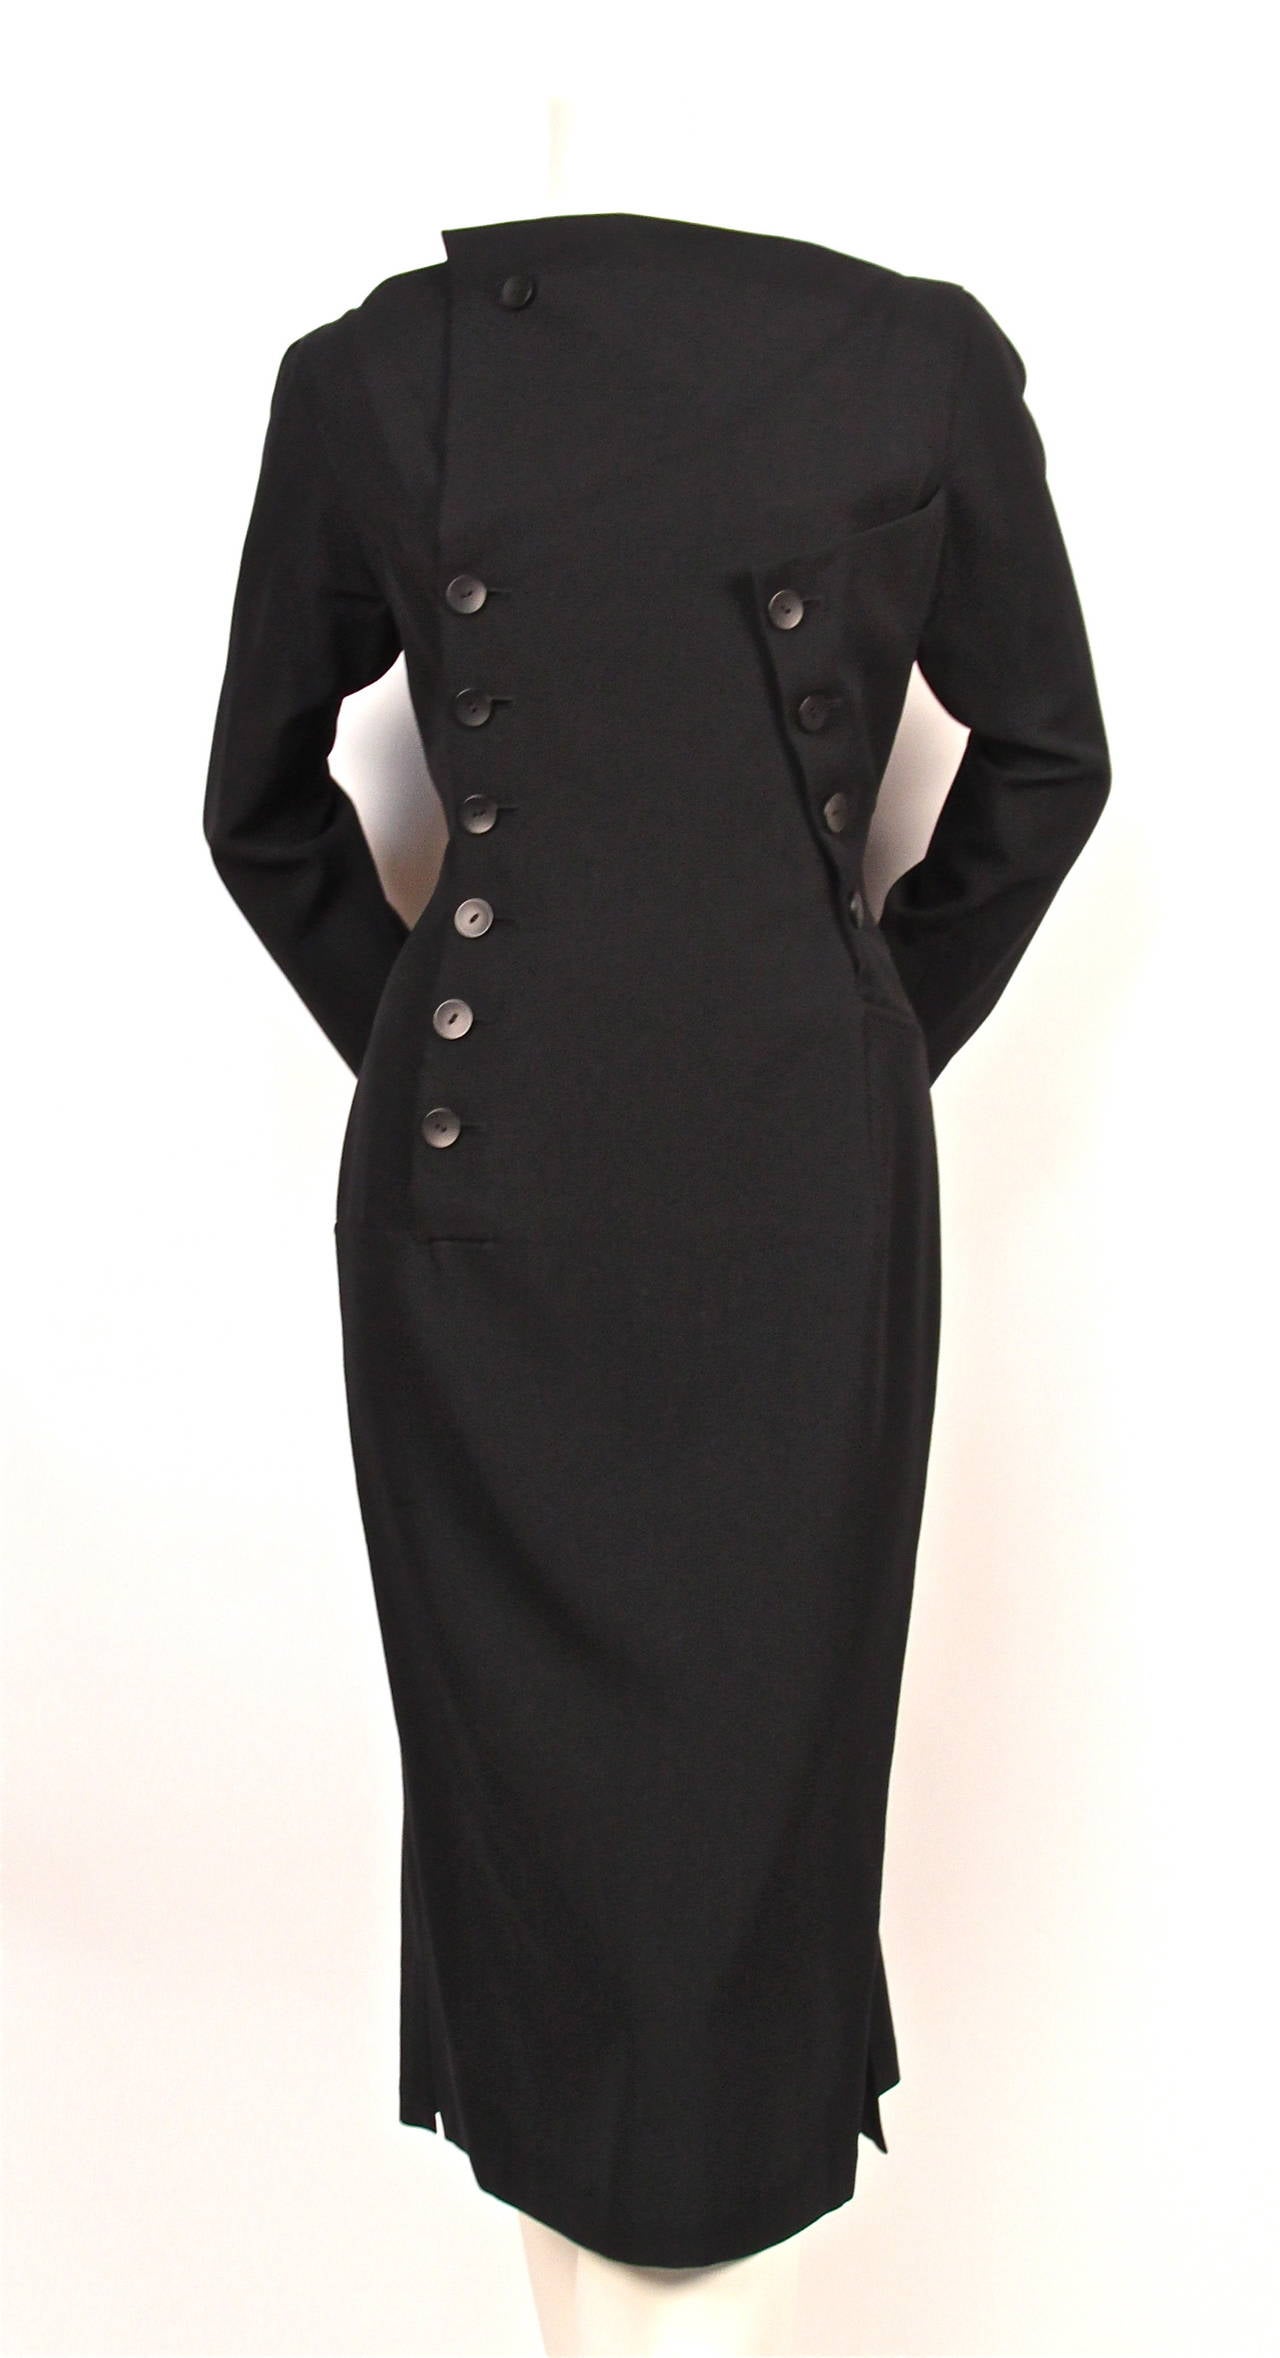 Jet black wool gaberdine dress with unusual asymmetrical button closure from Yohji Yamamoto dating to the 1980's. Dress is labeled a size 'S'. Approximate measurements: shoulder 16